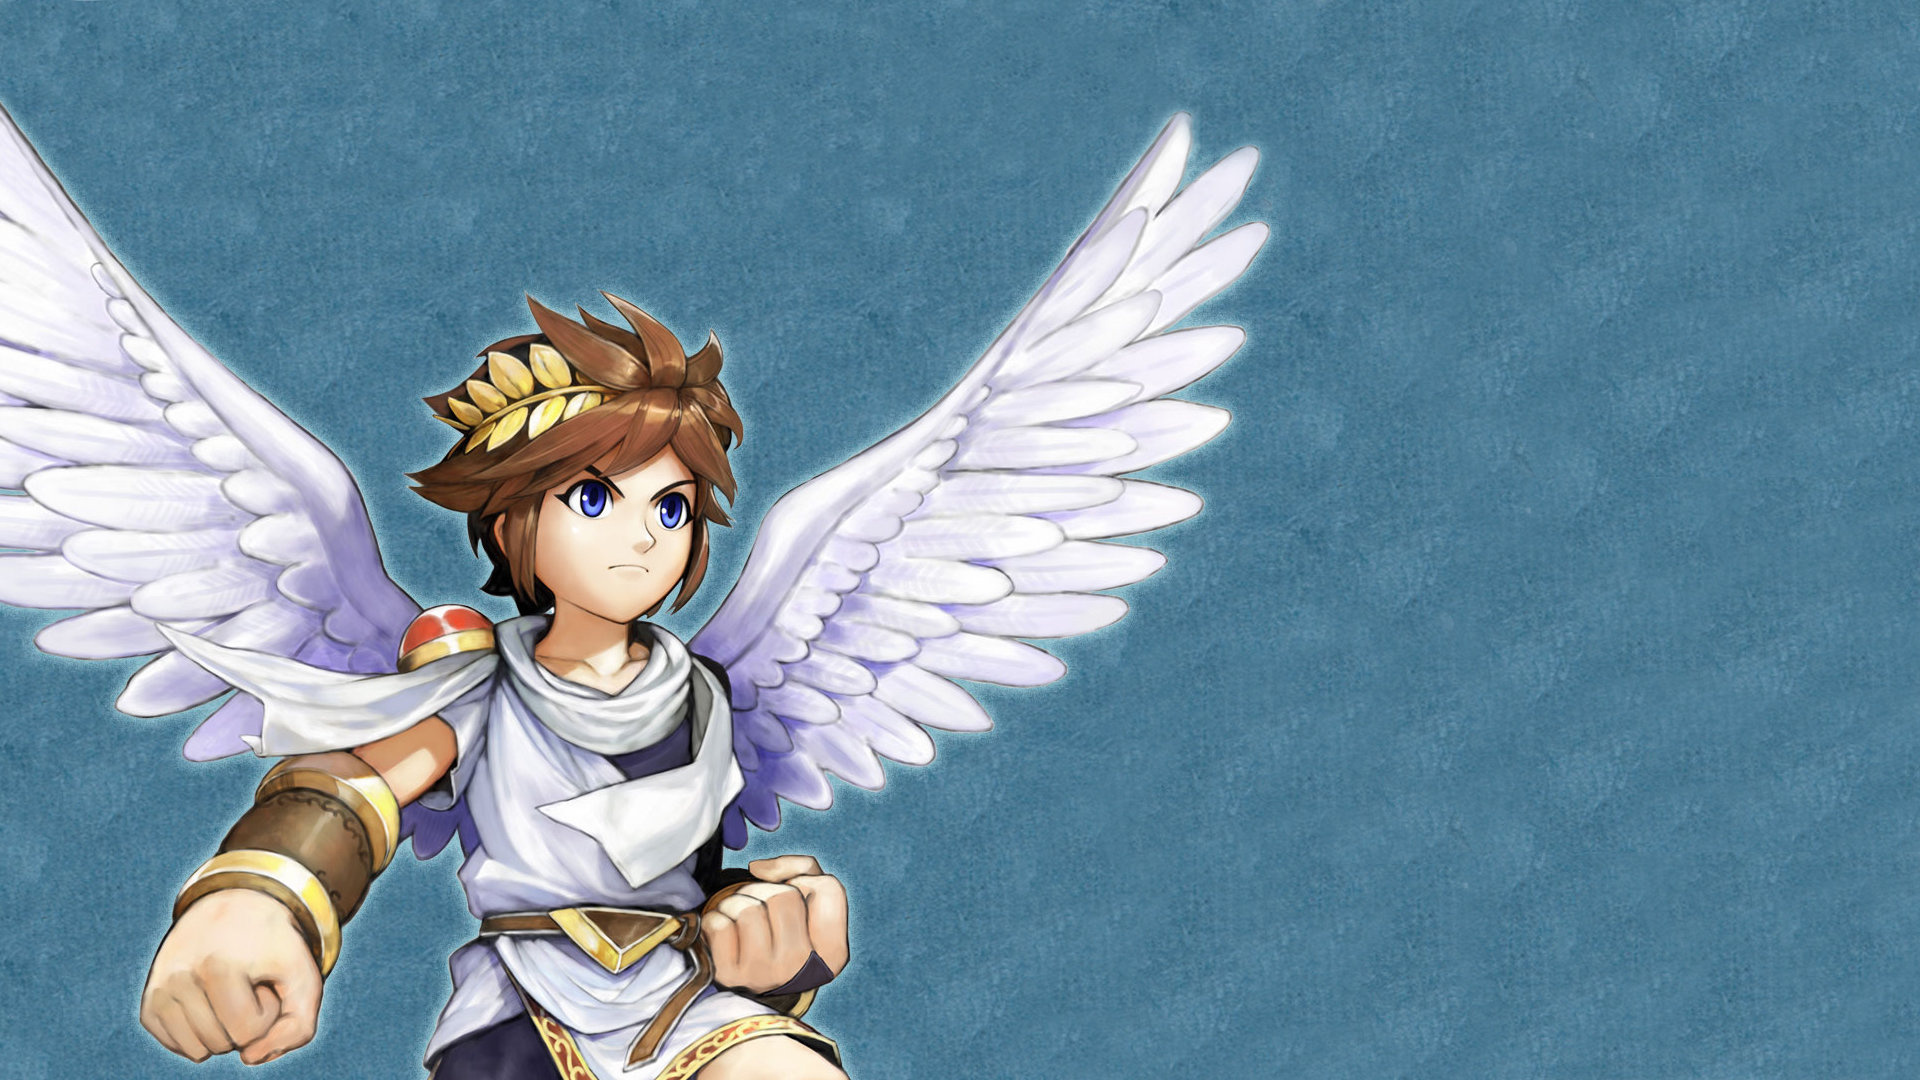 Kid Icarus wallpapers, Eye-catching visuals, Artistic wallpapers, Gaming inspiration, 1920x1080 Full HD Desktop